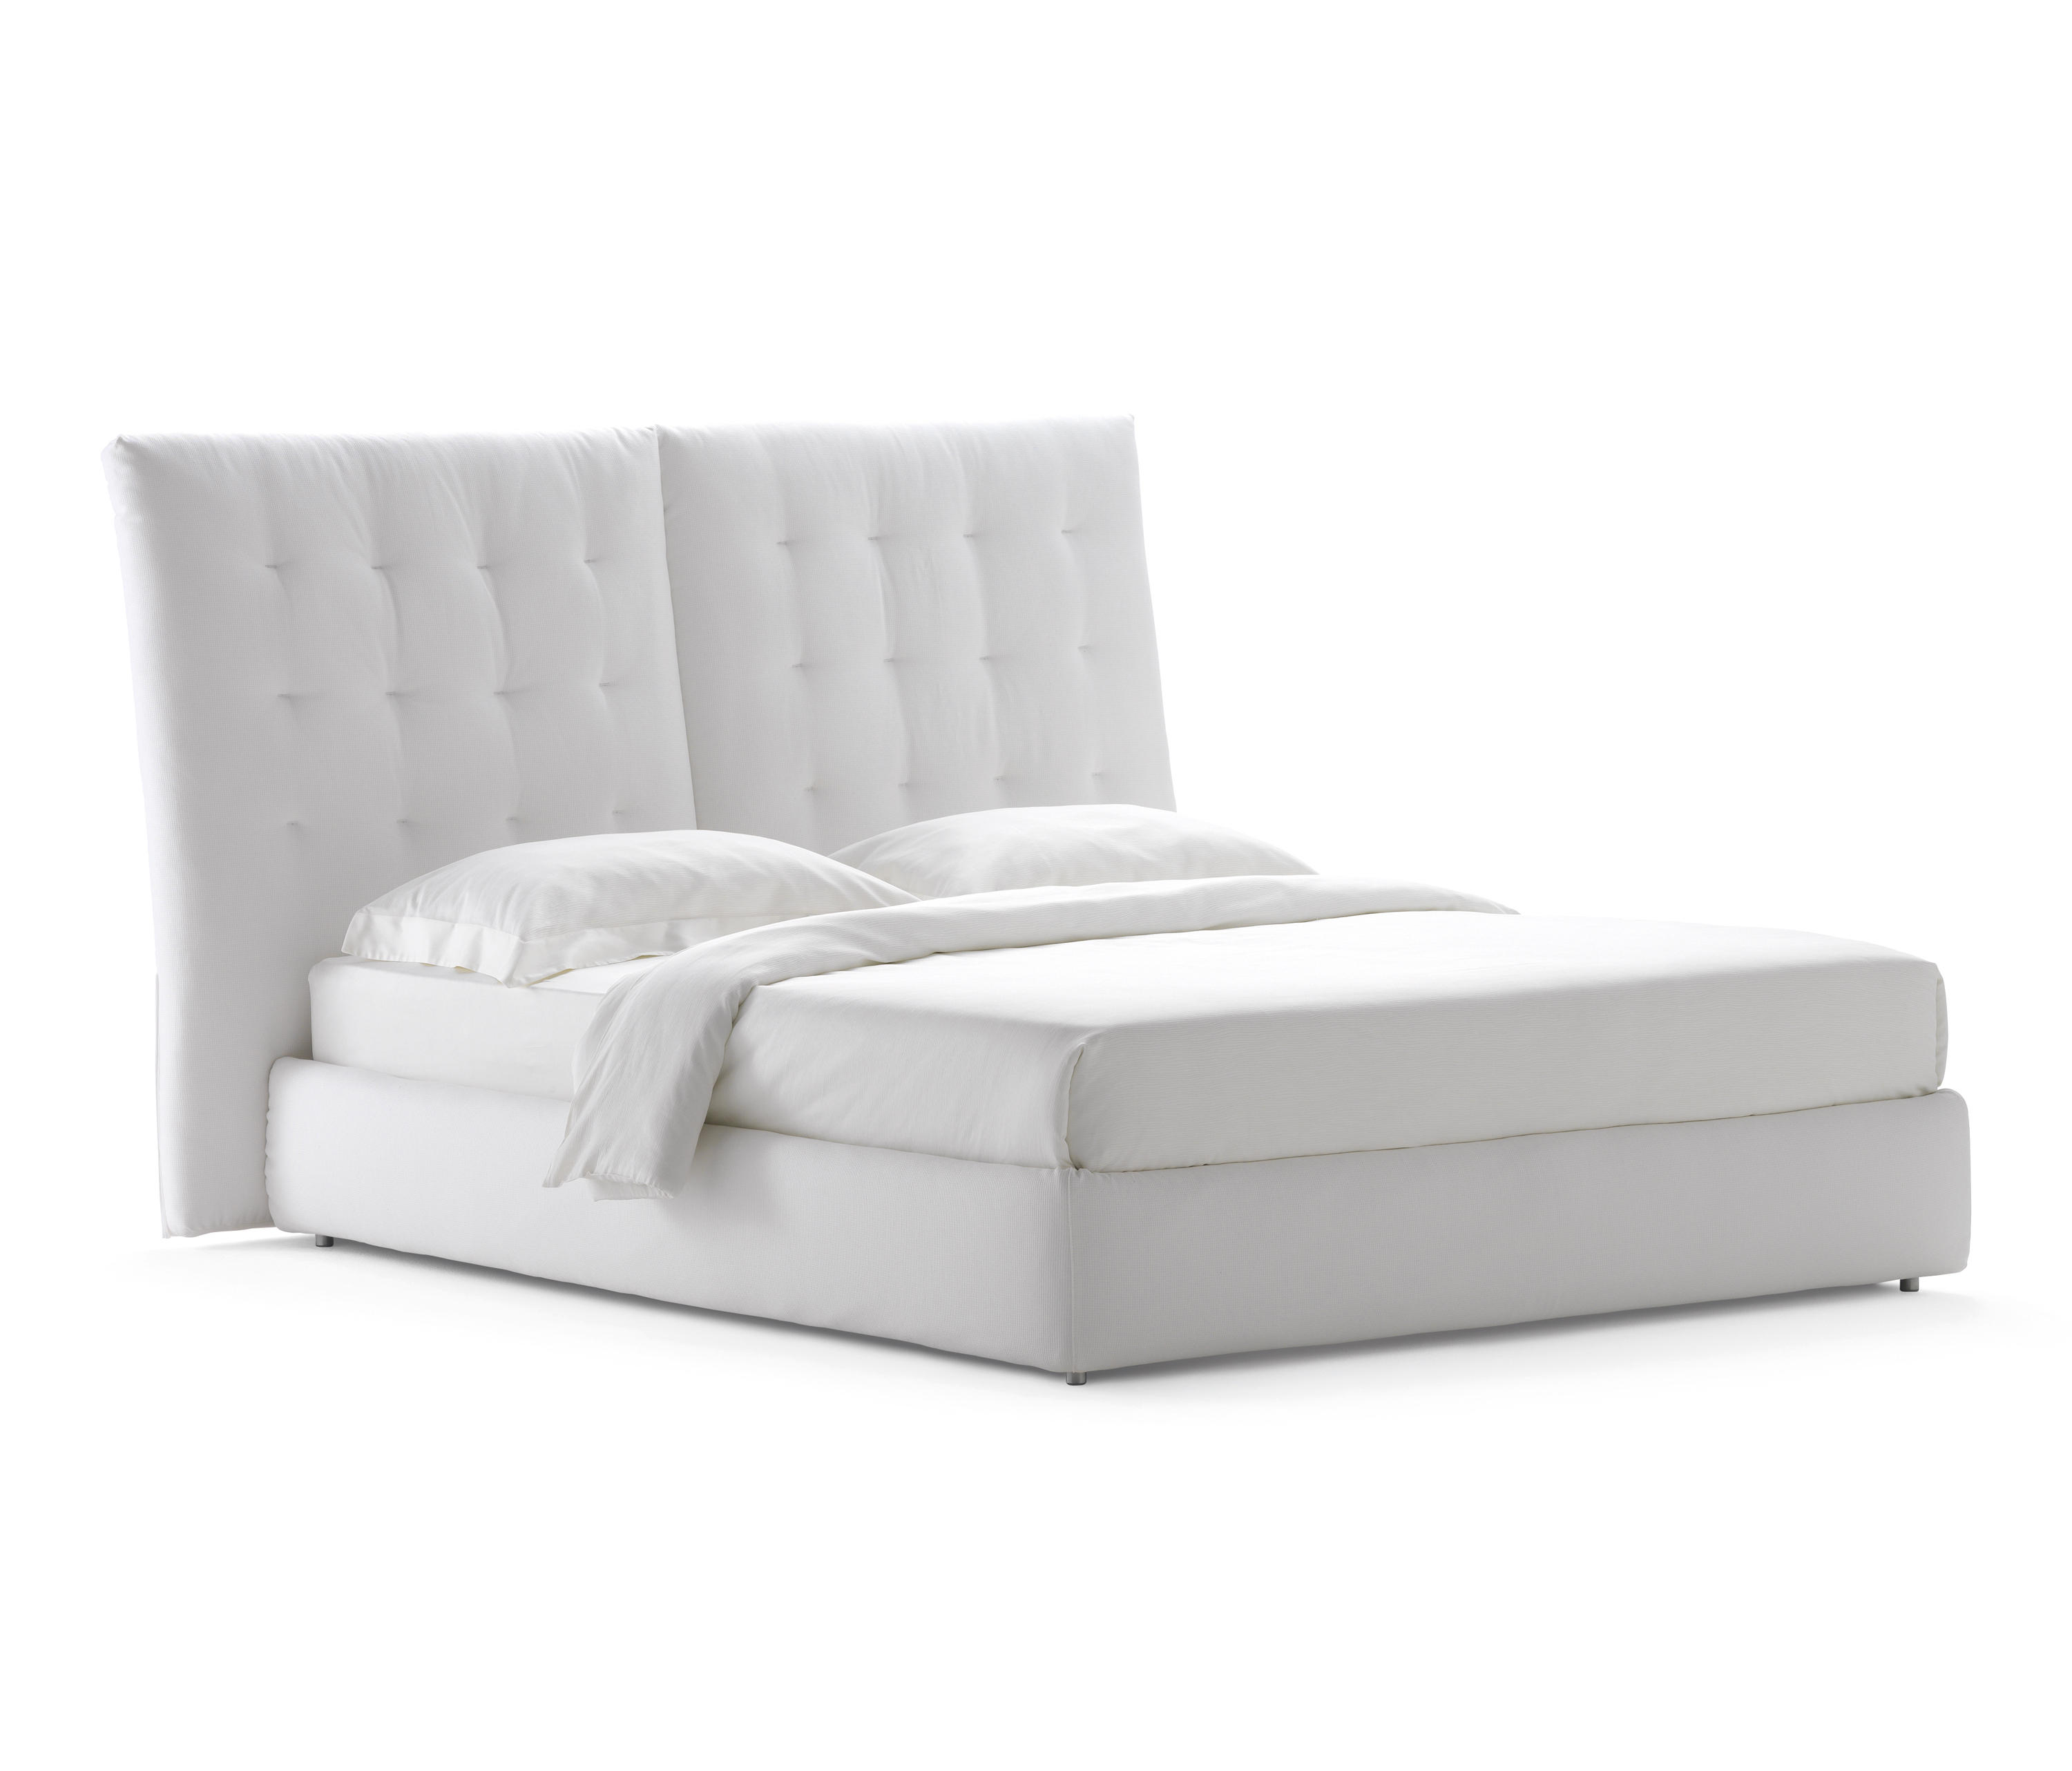 Angle Quilted Headboard Architonic, Best Angle For Headboard